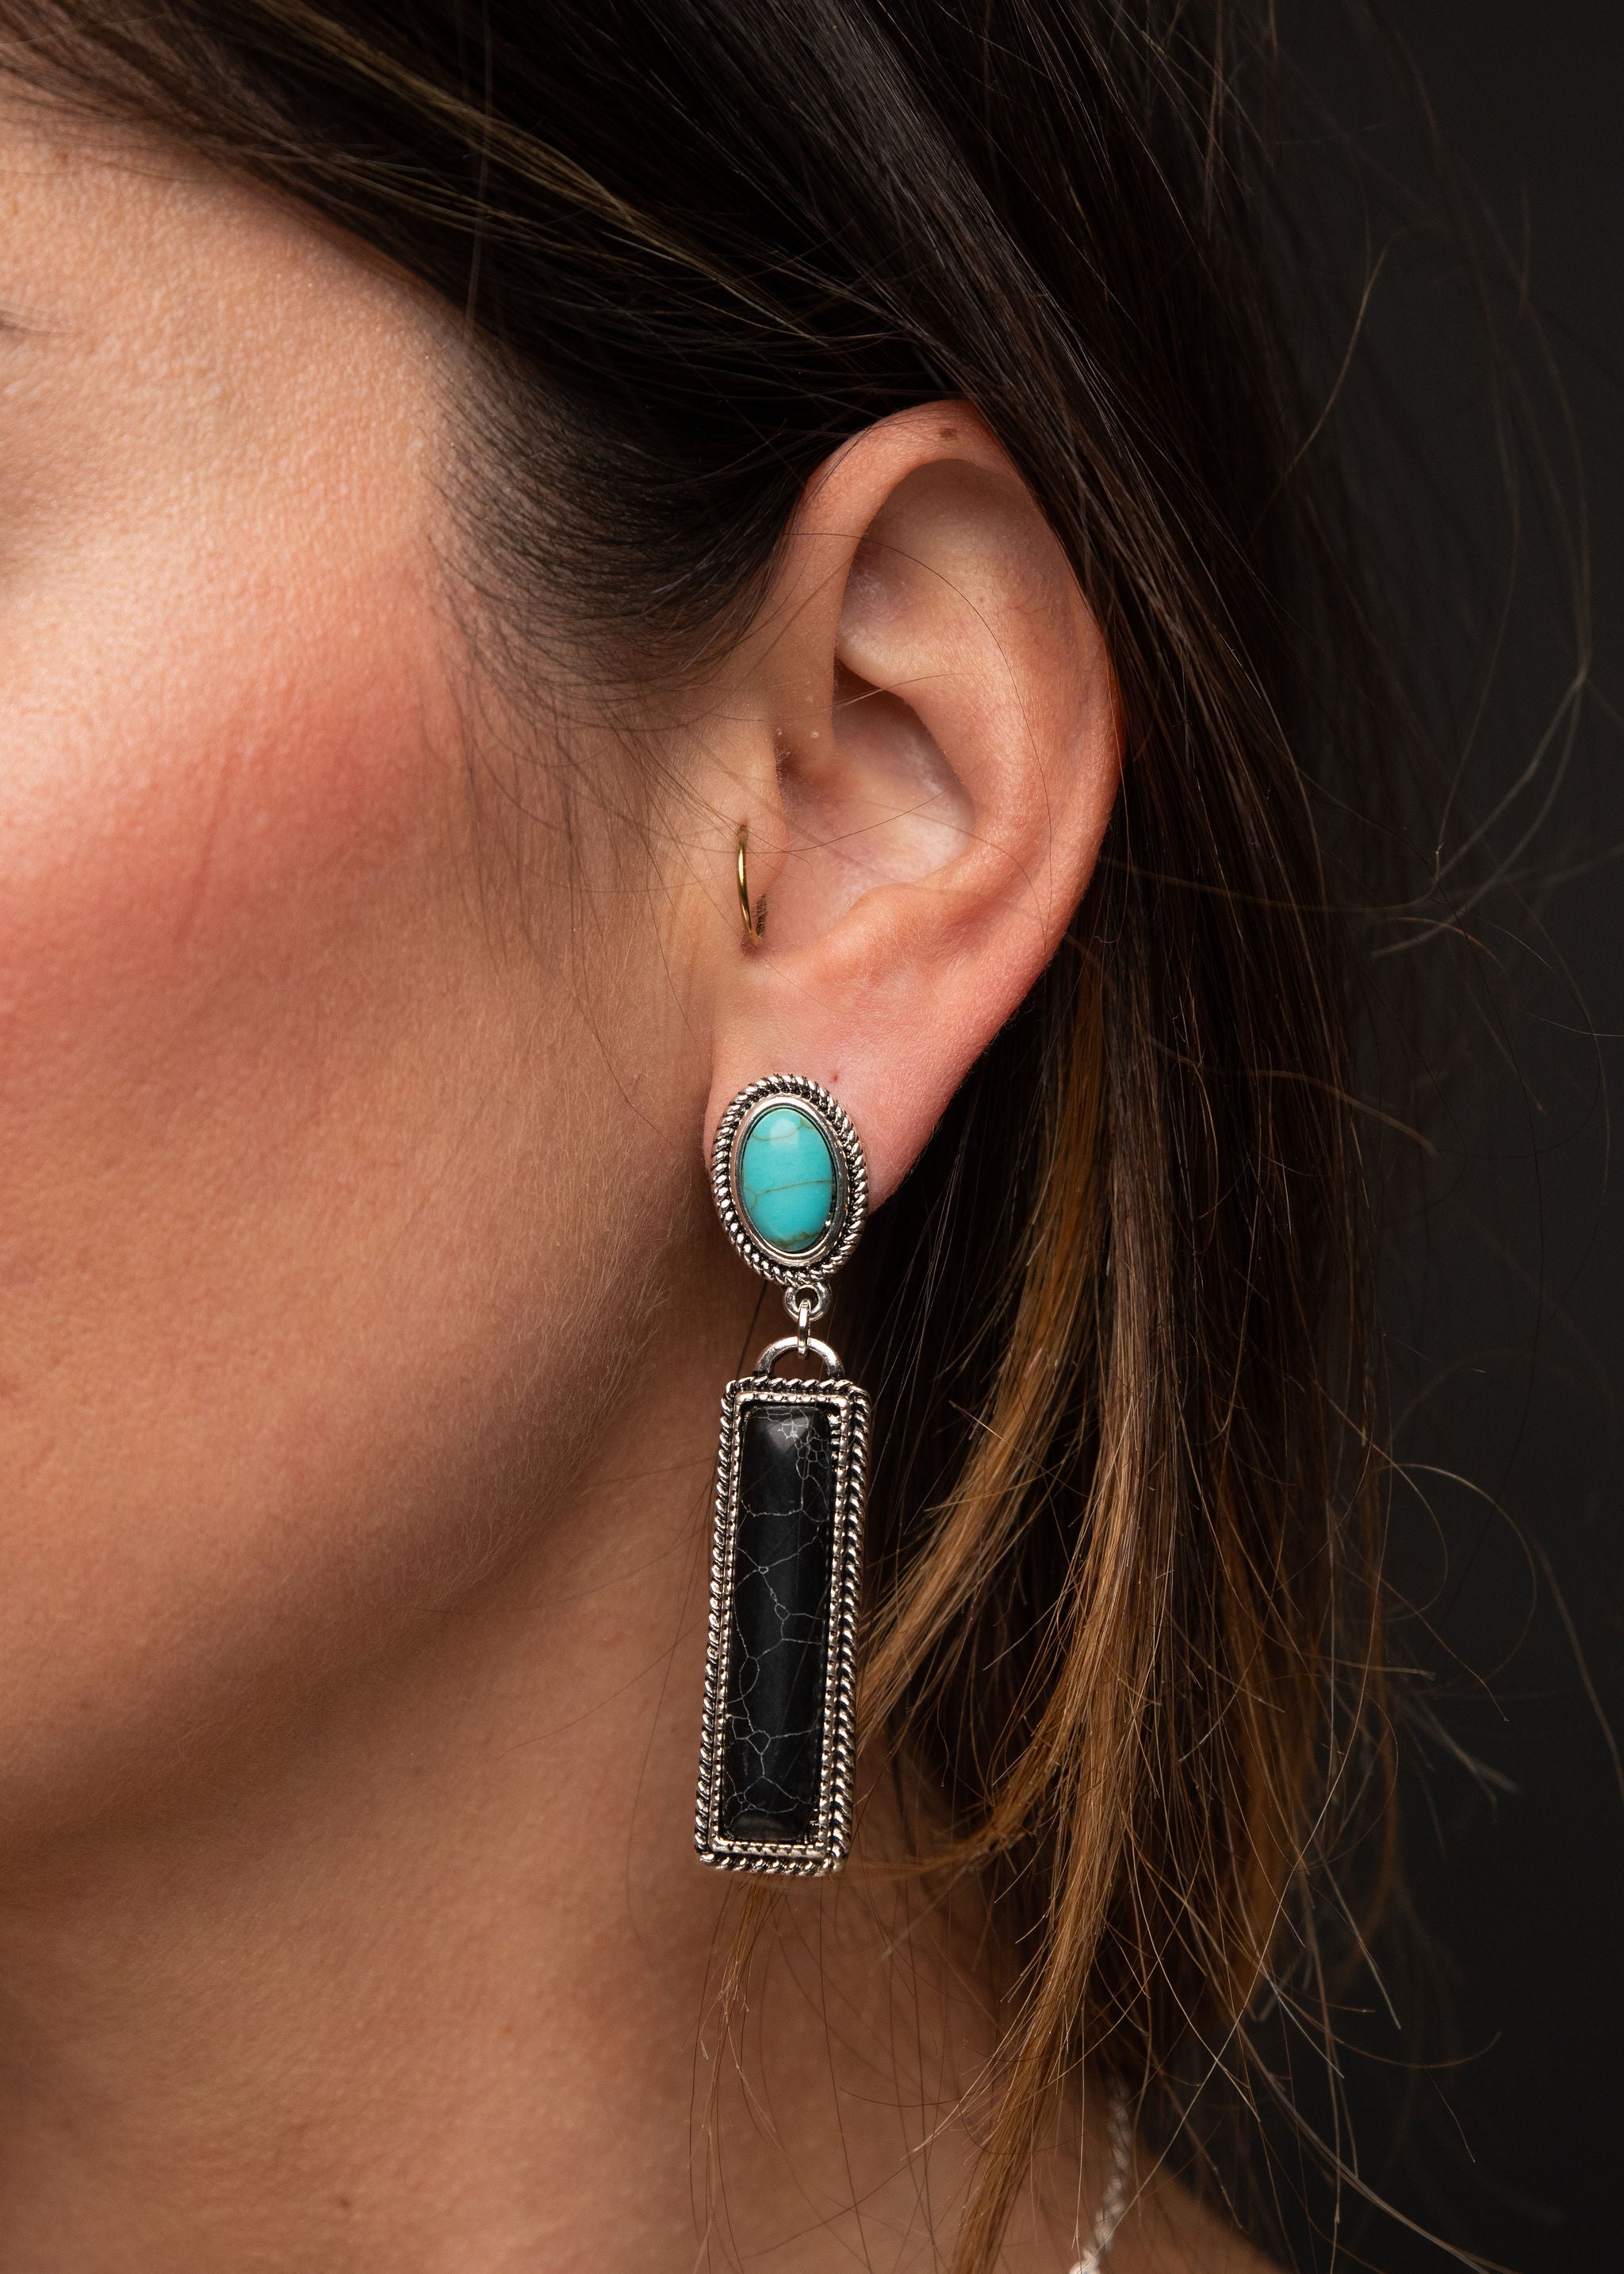 Black Bar and Turquoise Post Earring - Rural Haze